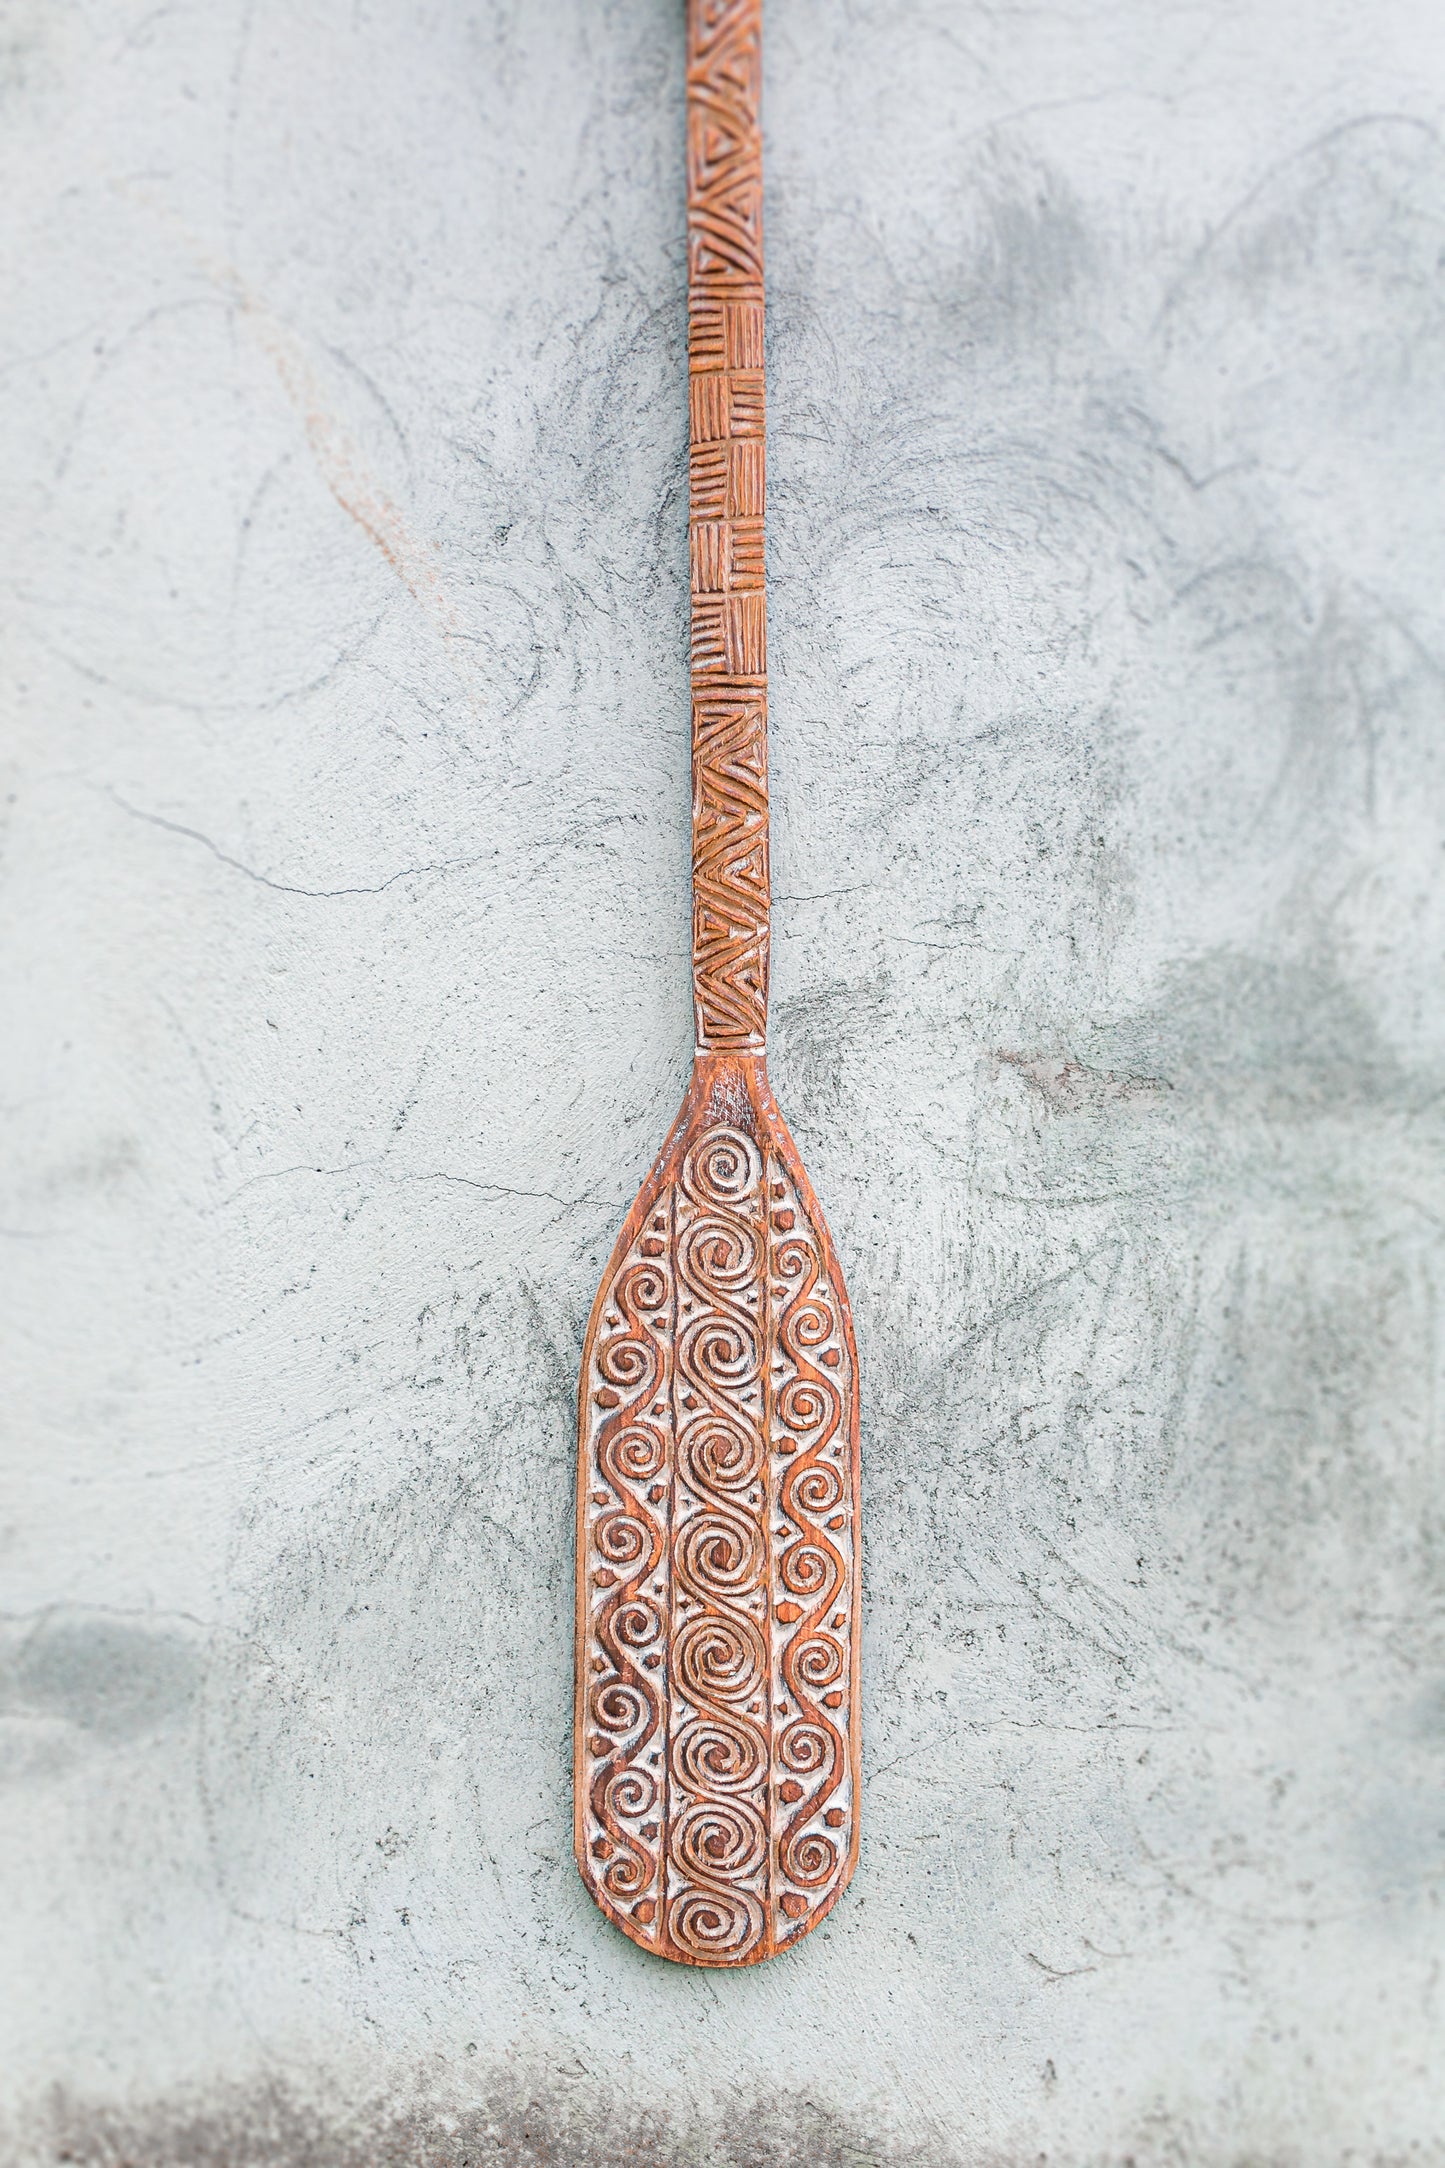 Medium size Timor Tribal Hand Carved wooden Oars made from Indonesia to decorate your indoor space with elegance - home decor - indoor decor - interior decor - wall decor - wall hanging decoration